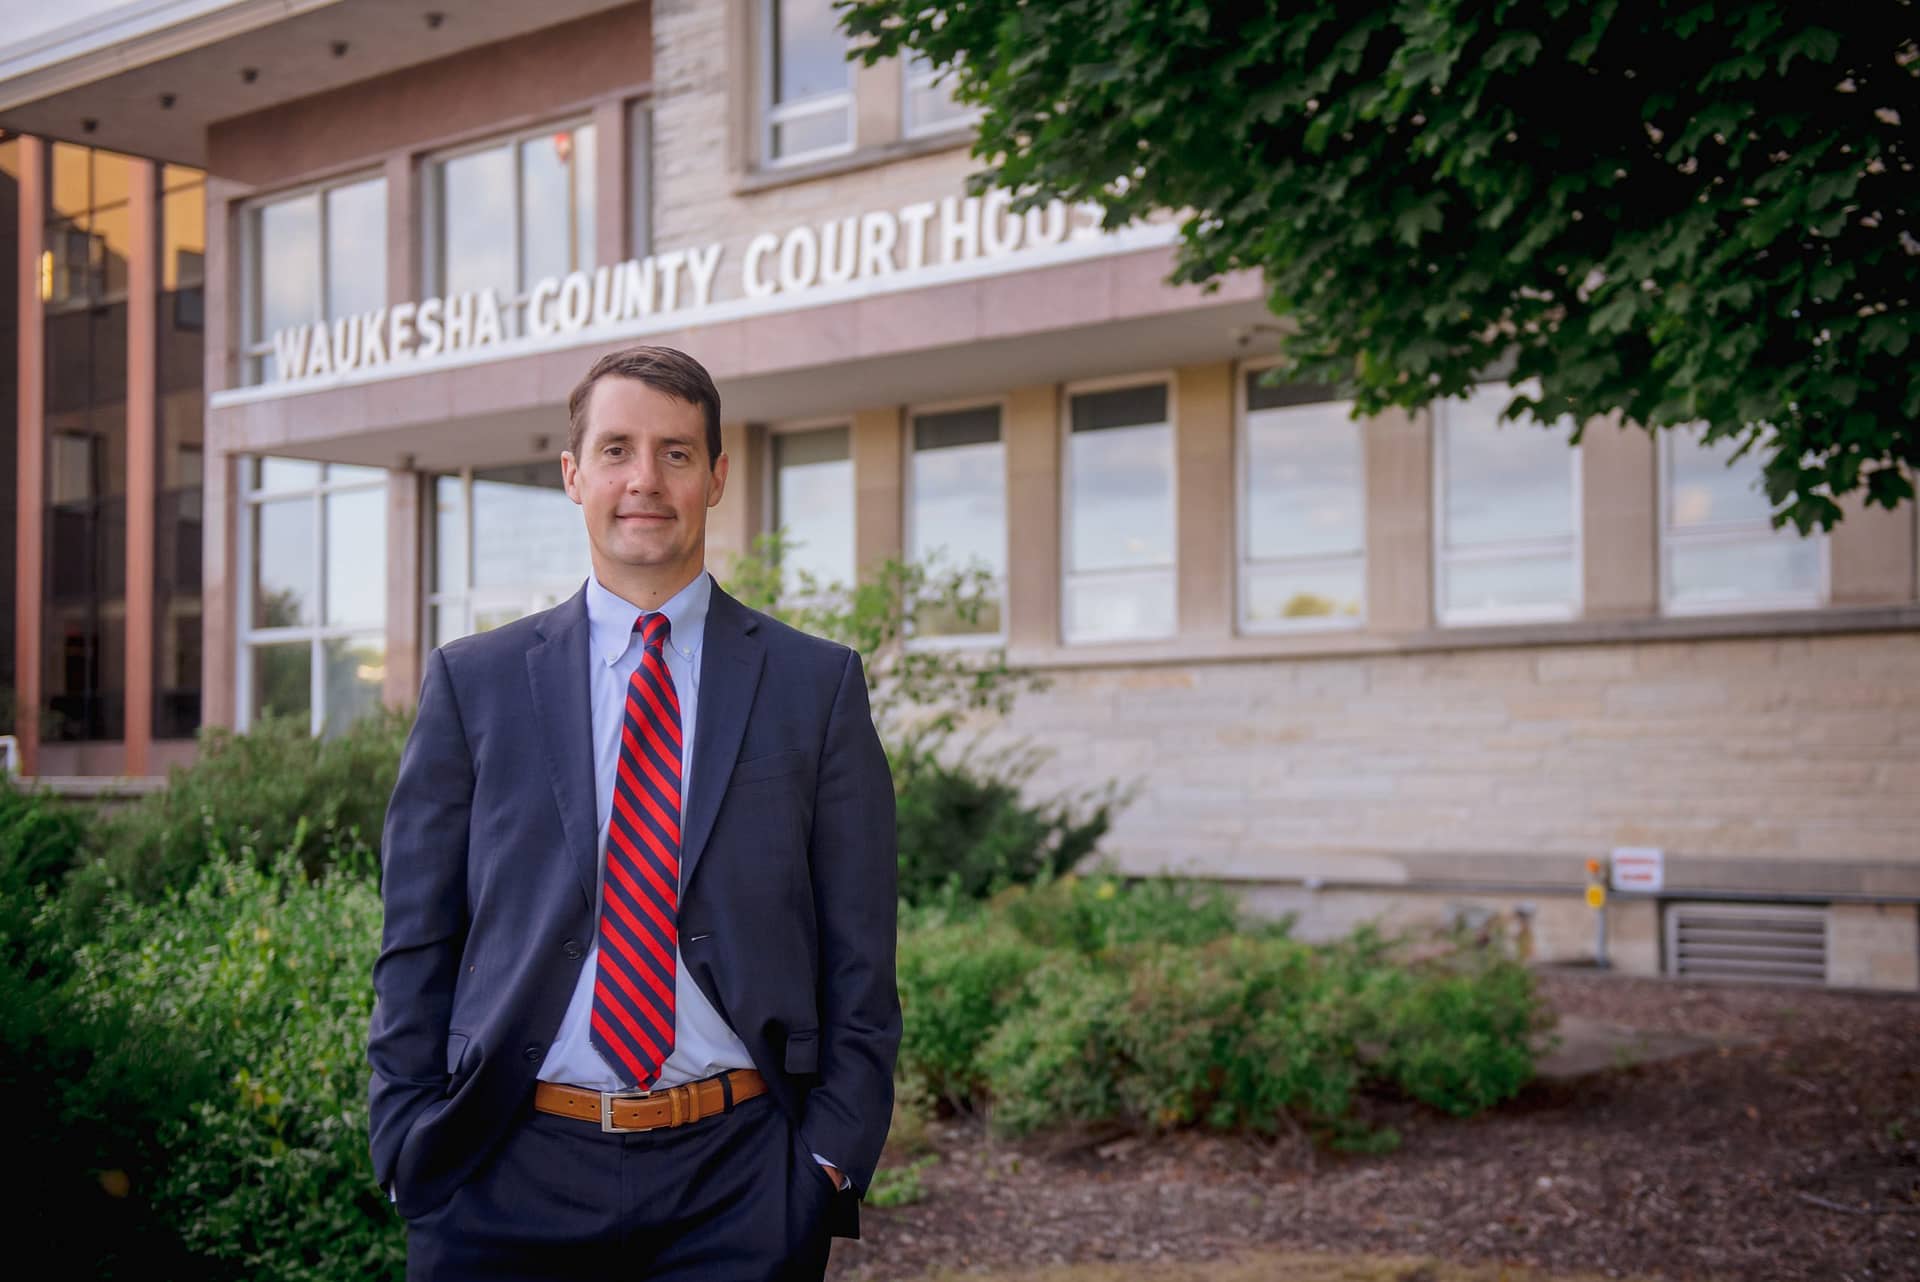 Mike Launches Campaign for District Attorney of Waukesha County